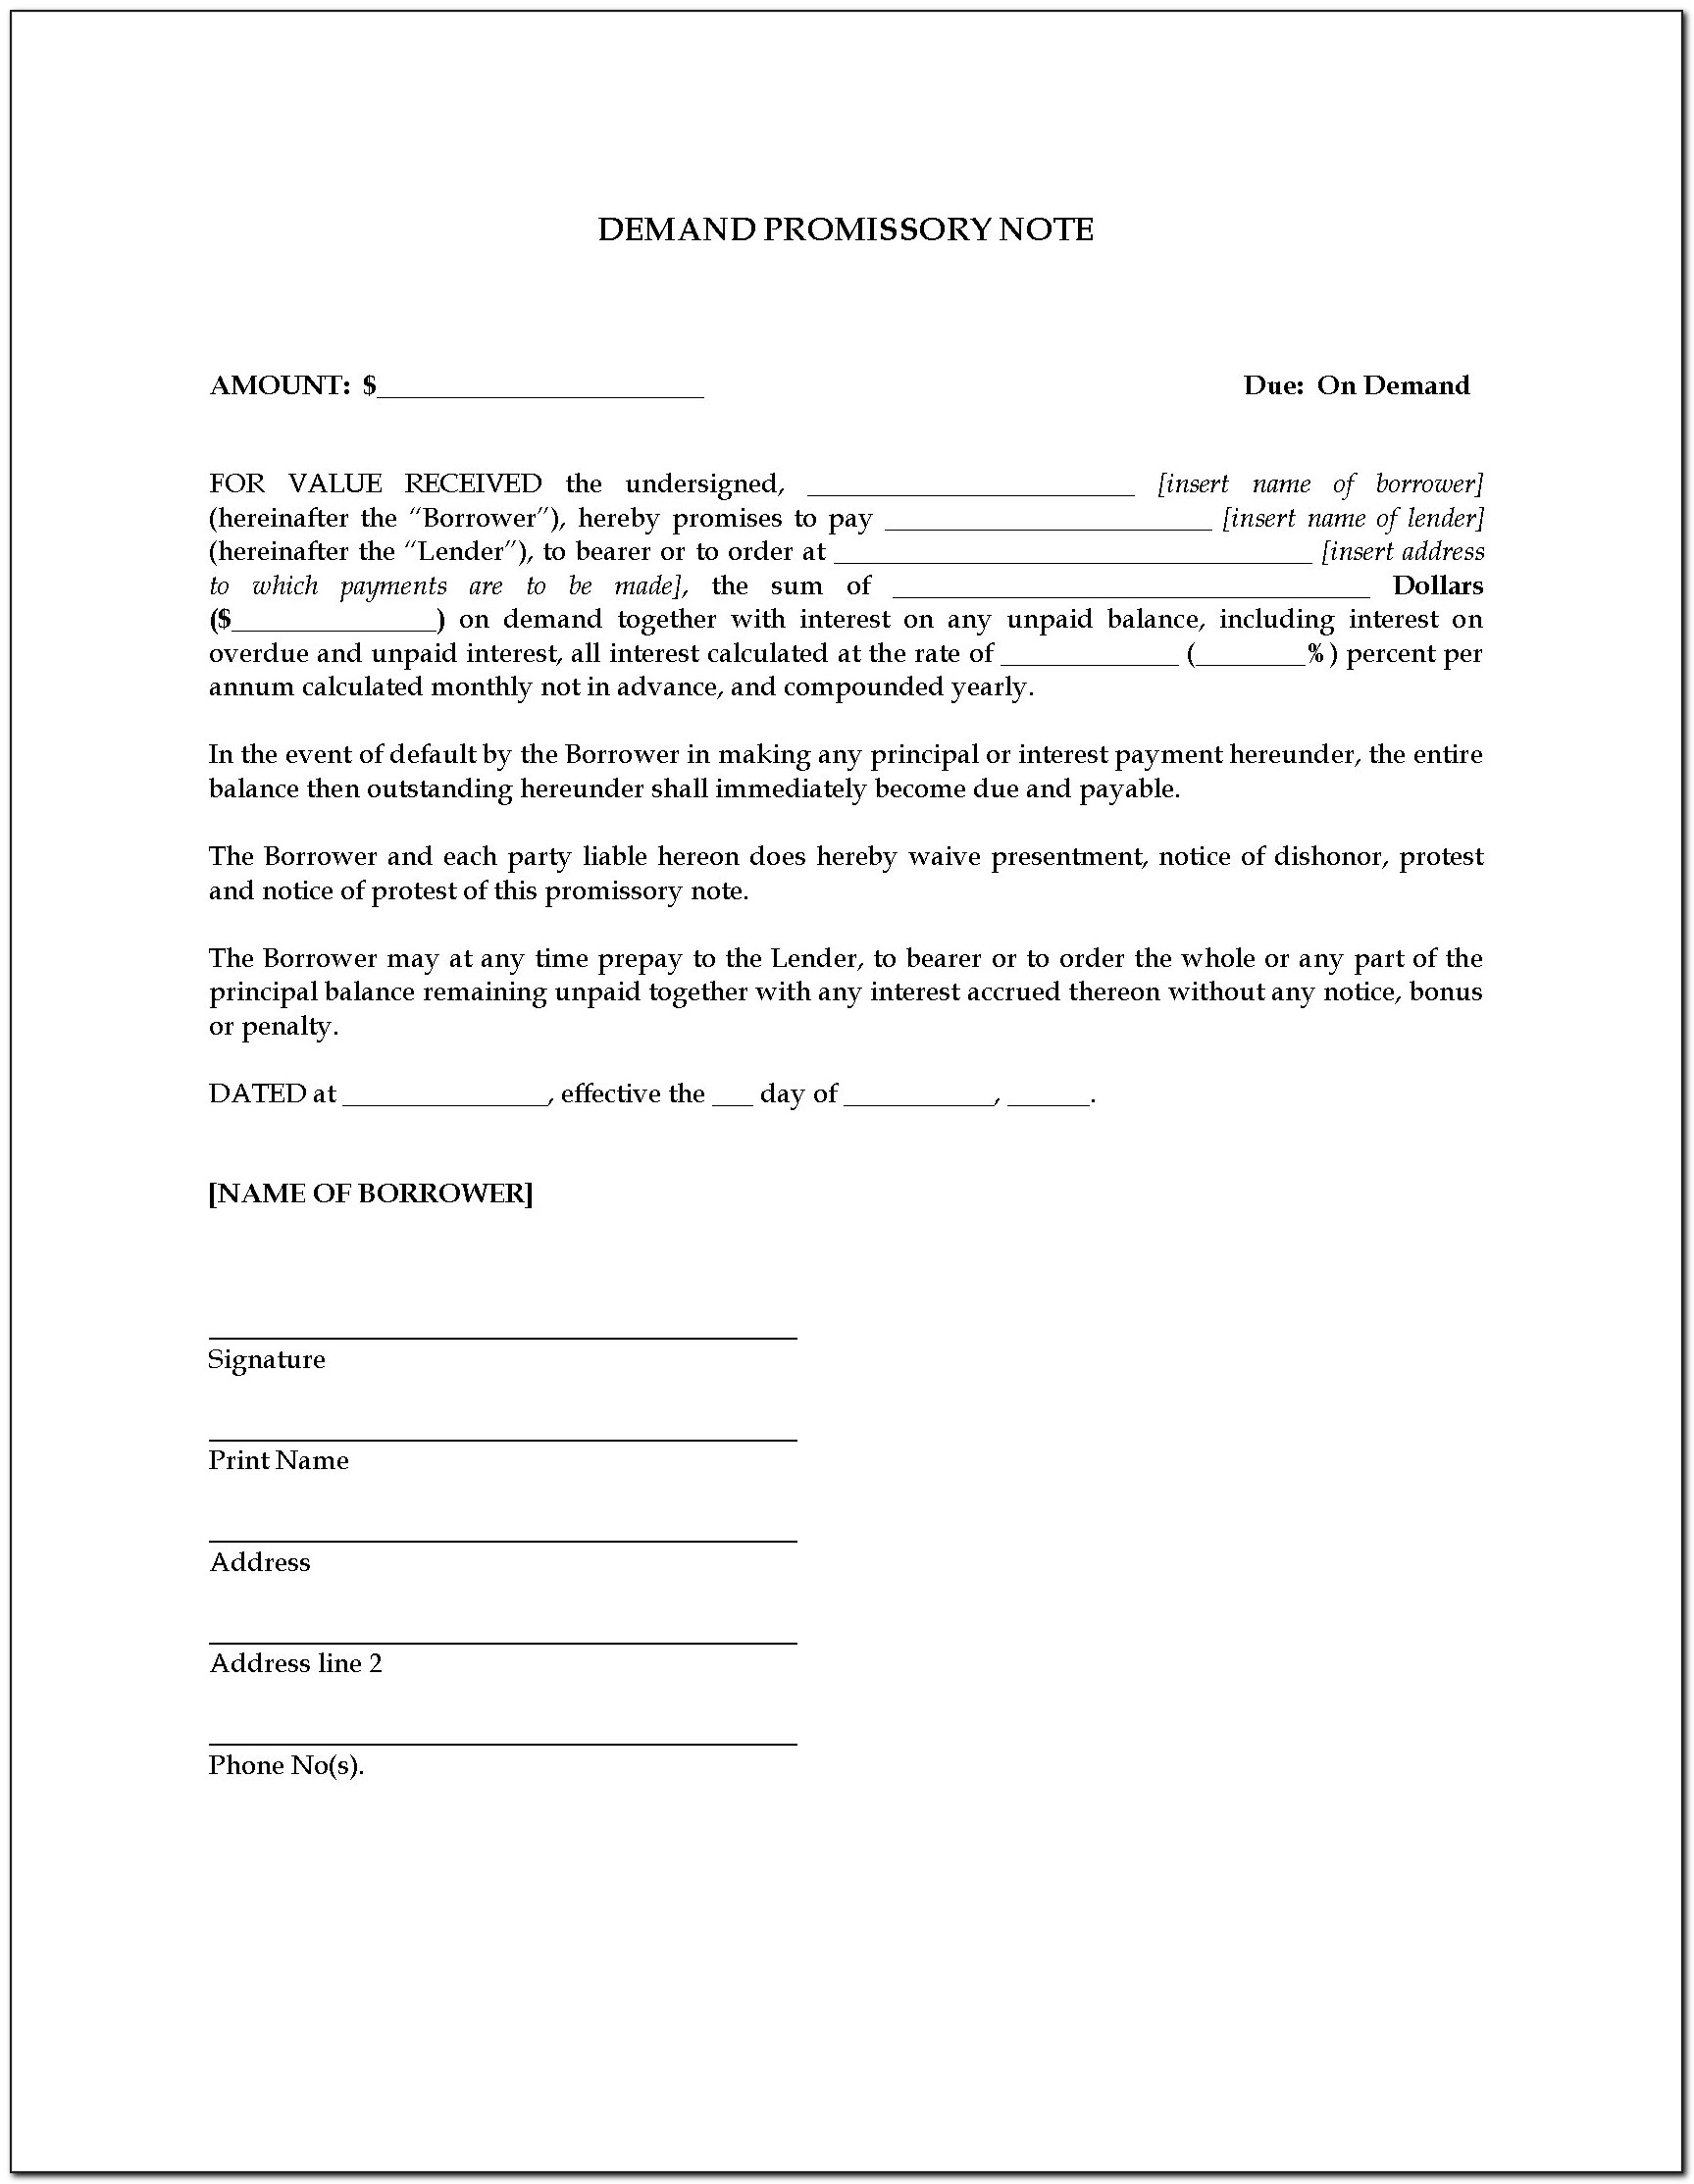 Free Demand Promissory Note Form